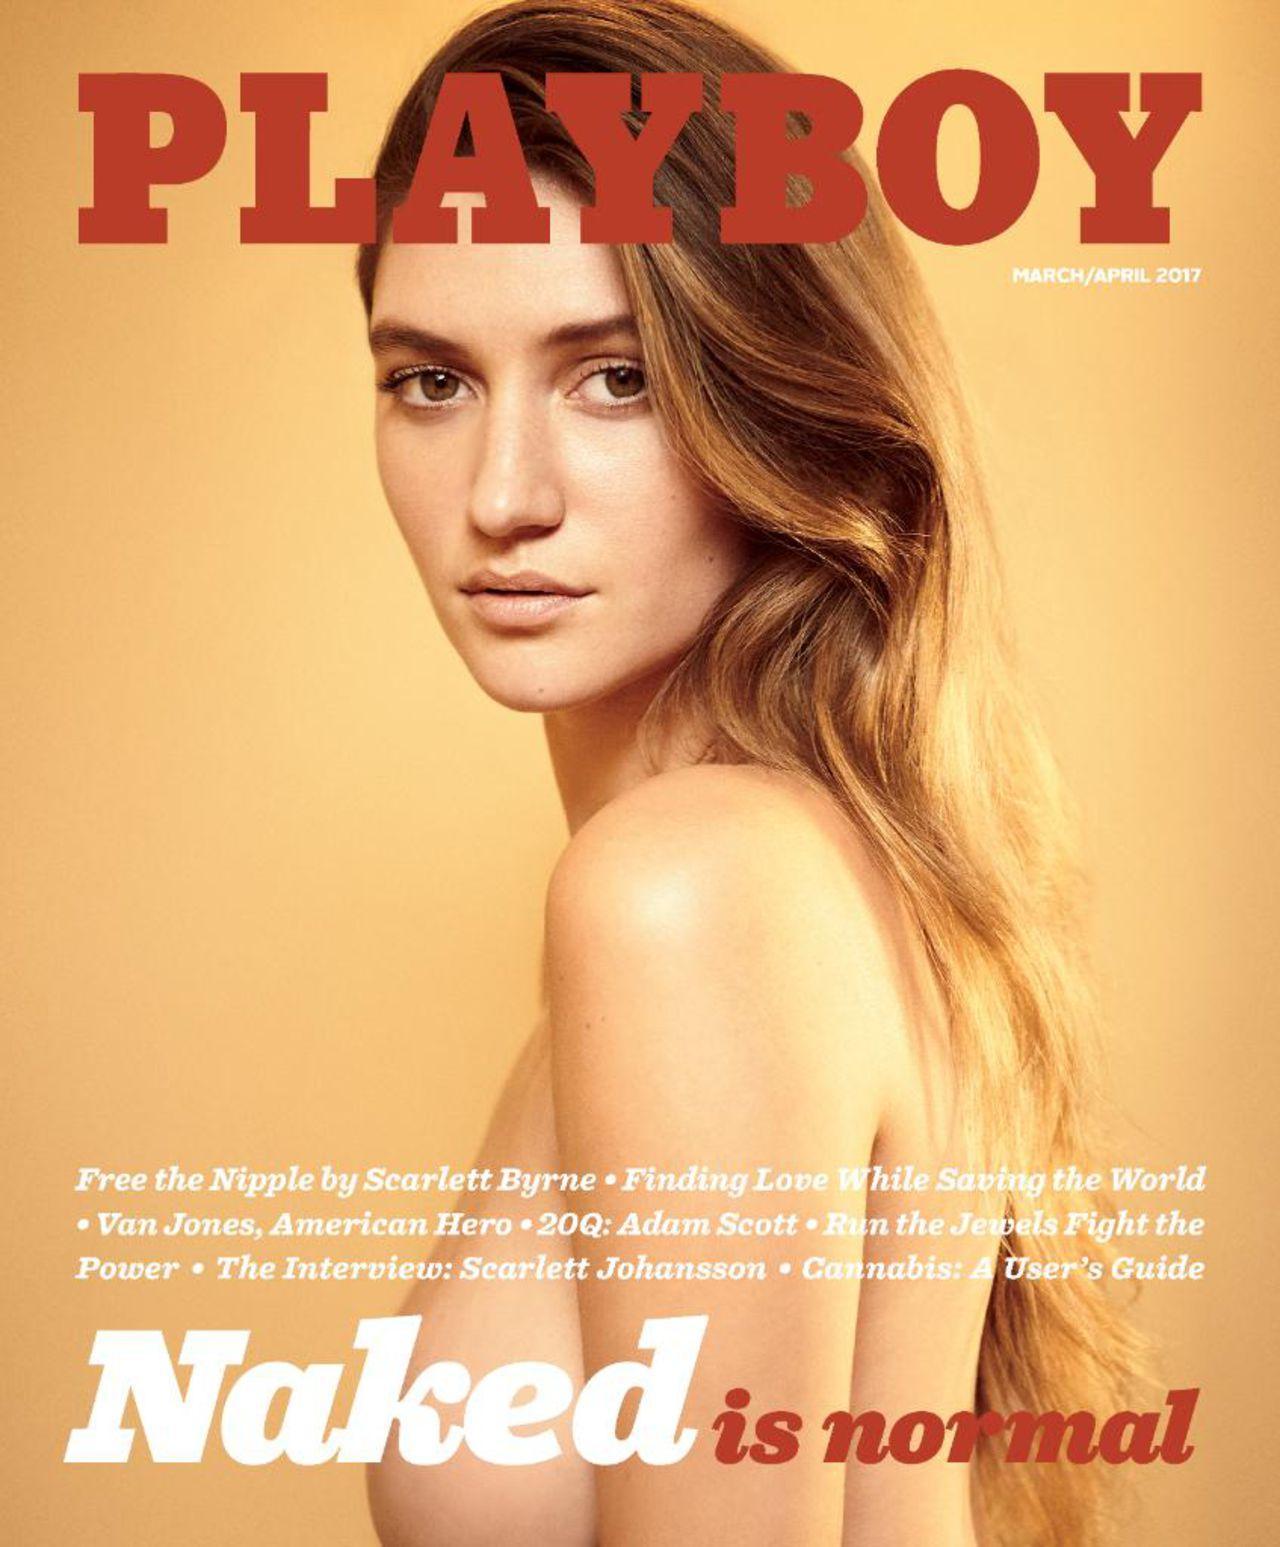 Playboy's March 2017 cover